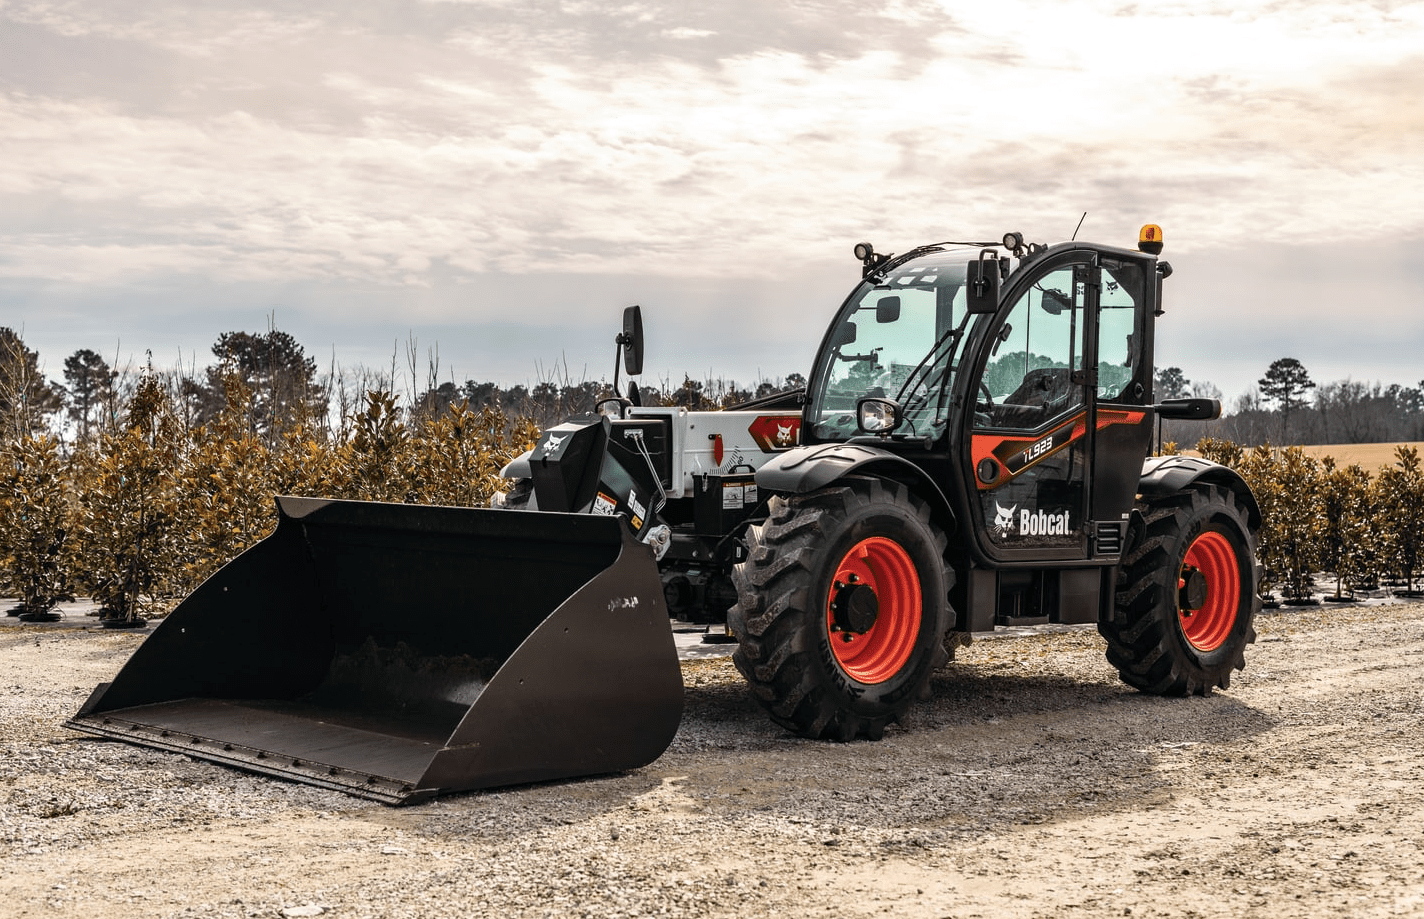 Browse Specs and more for the Bobcat TL923 Telehandler - Bobcat of Indy